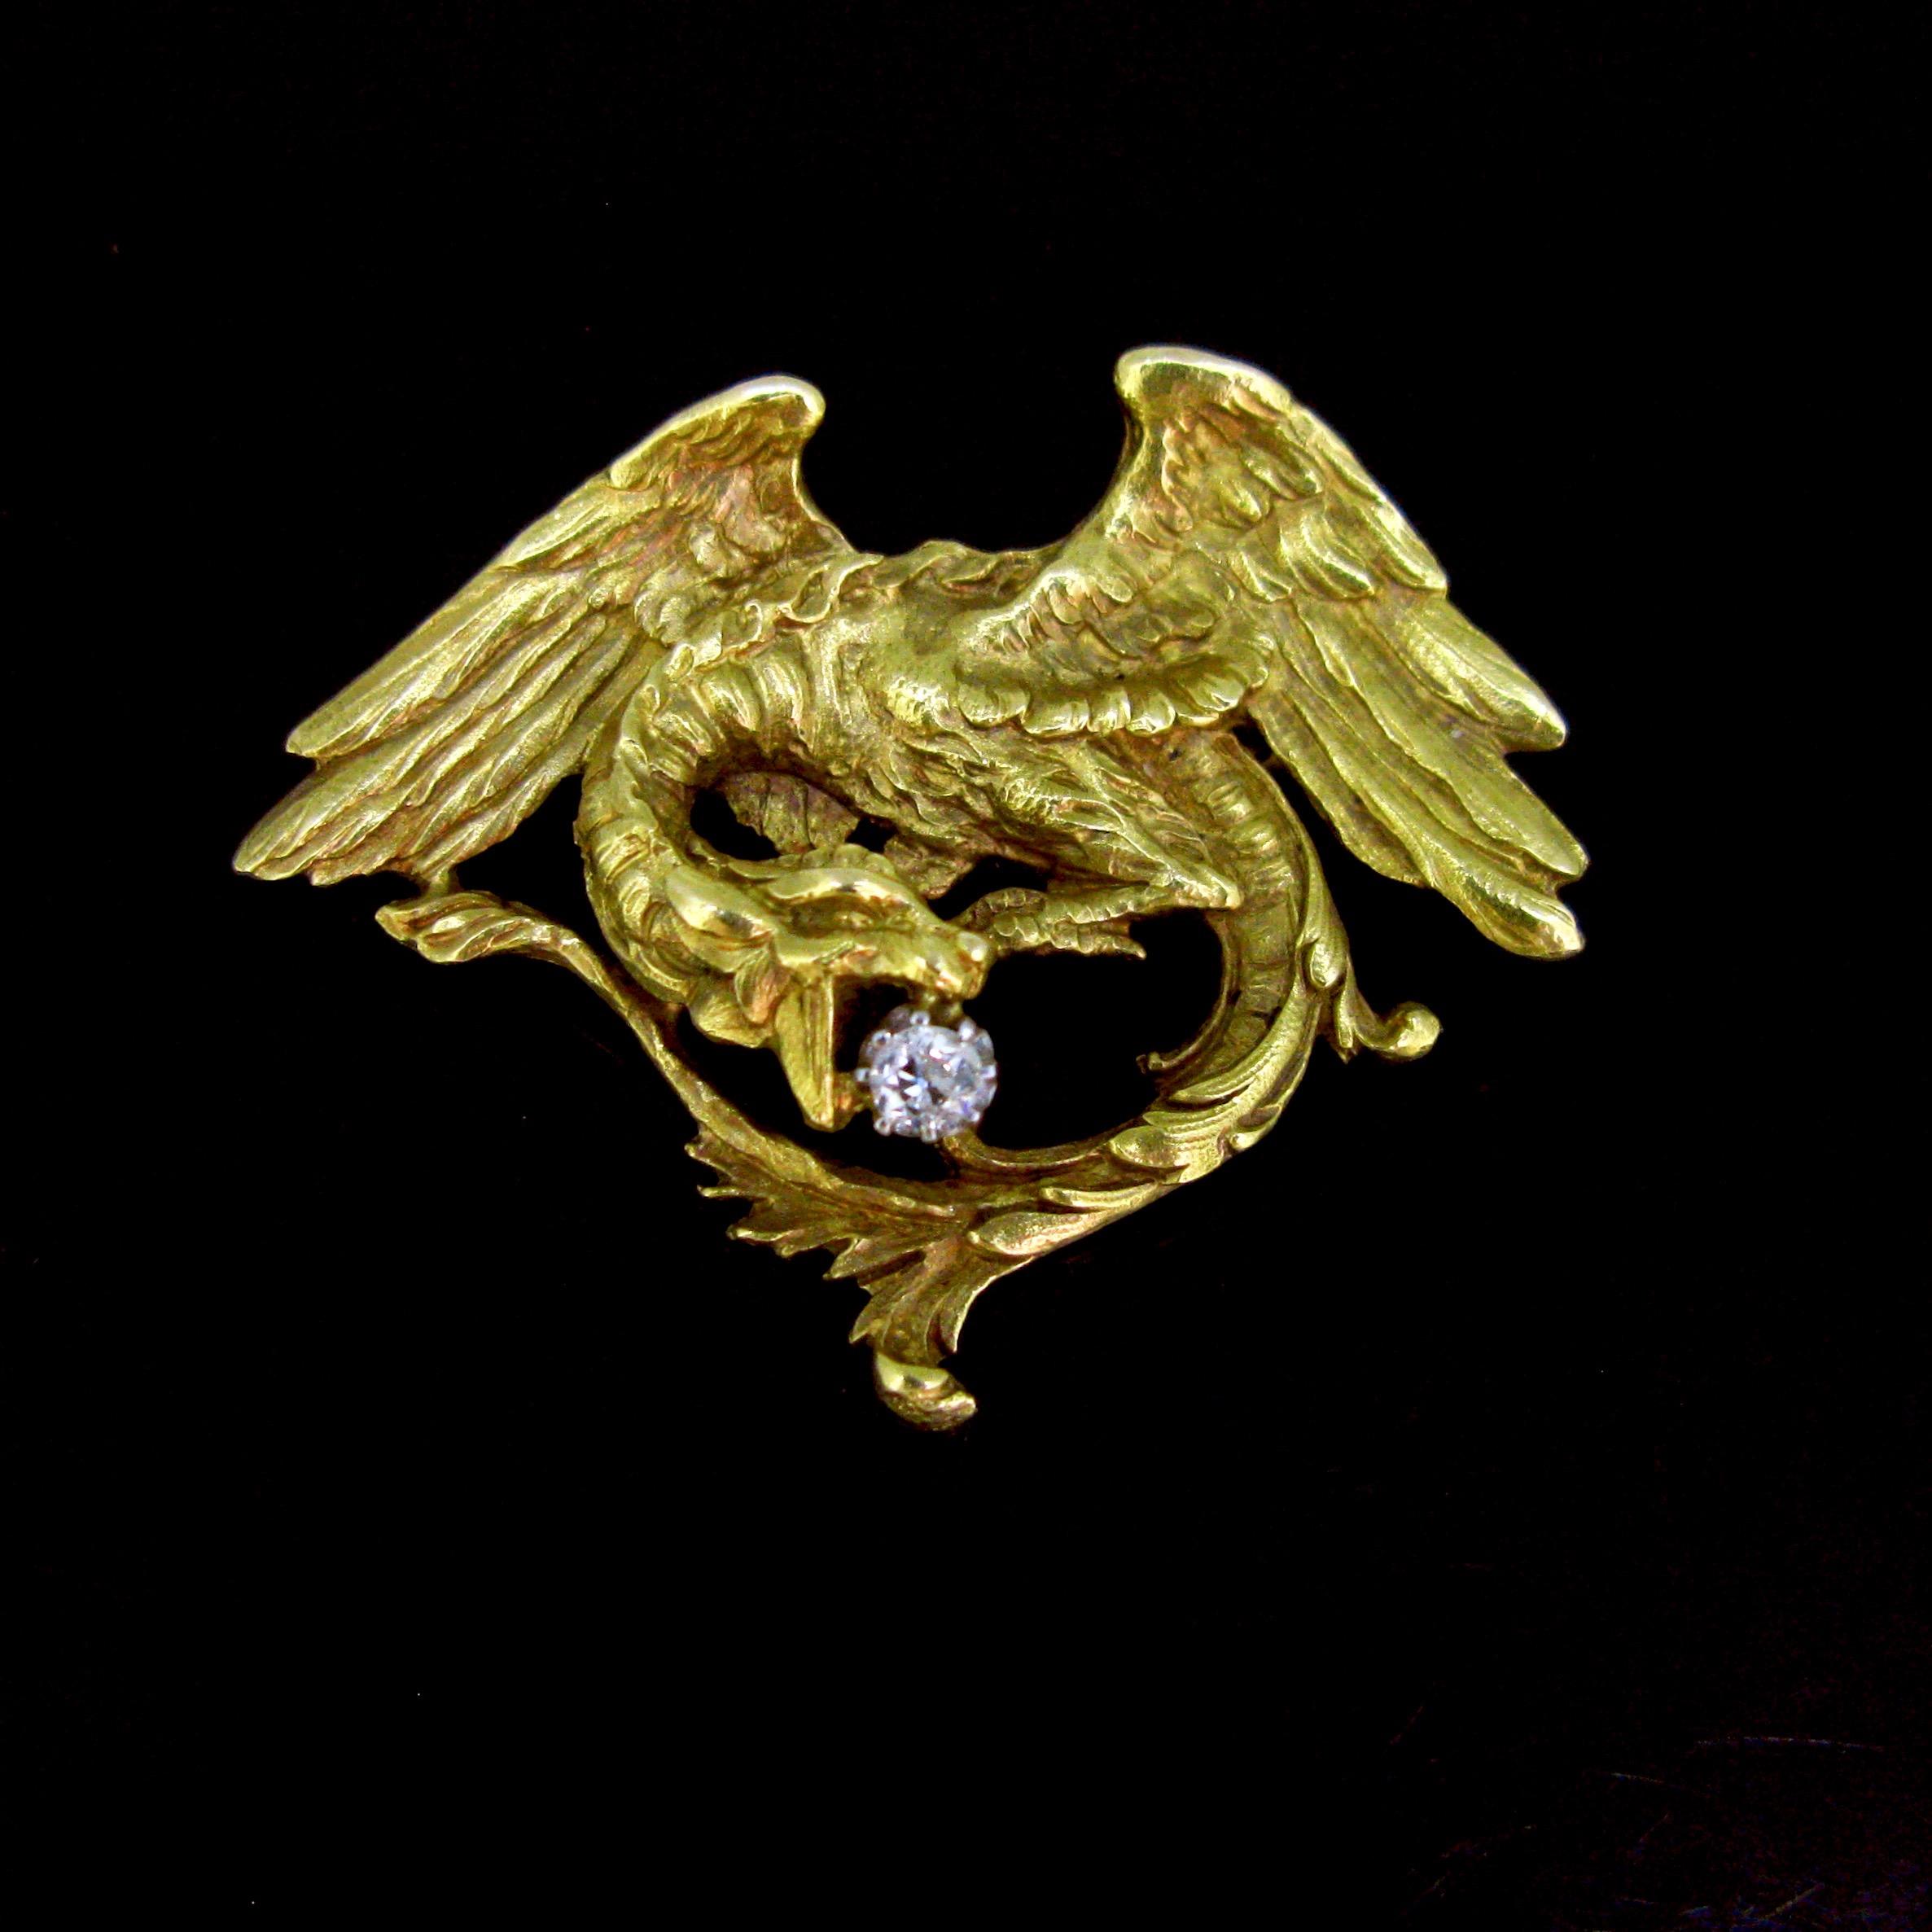 This stunning brooch is from the Art Nouveau era. It features a chimera / griffin holding a diamond in his jaws. The diamond is set on platinum and the brooch is fully made in 18kt solid yellow gold. It has been controlled twice with the French